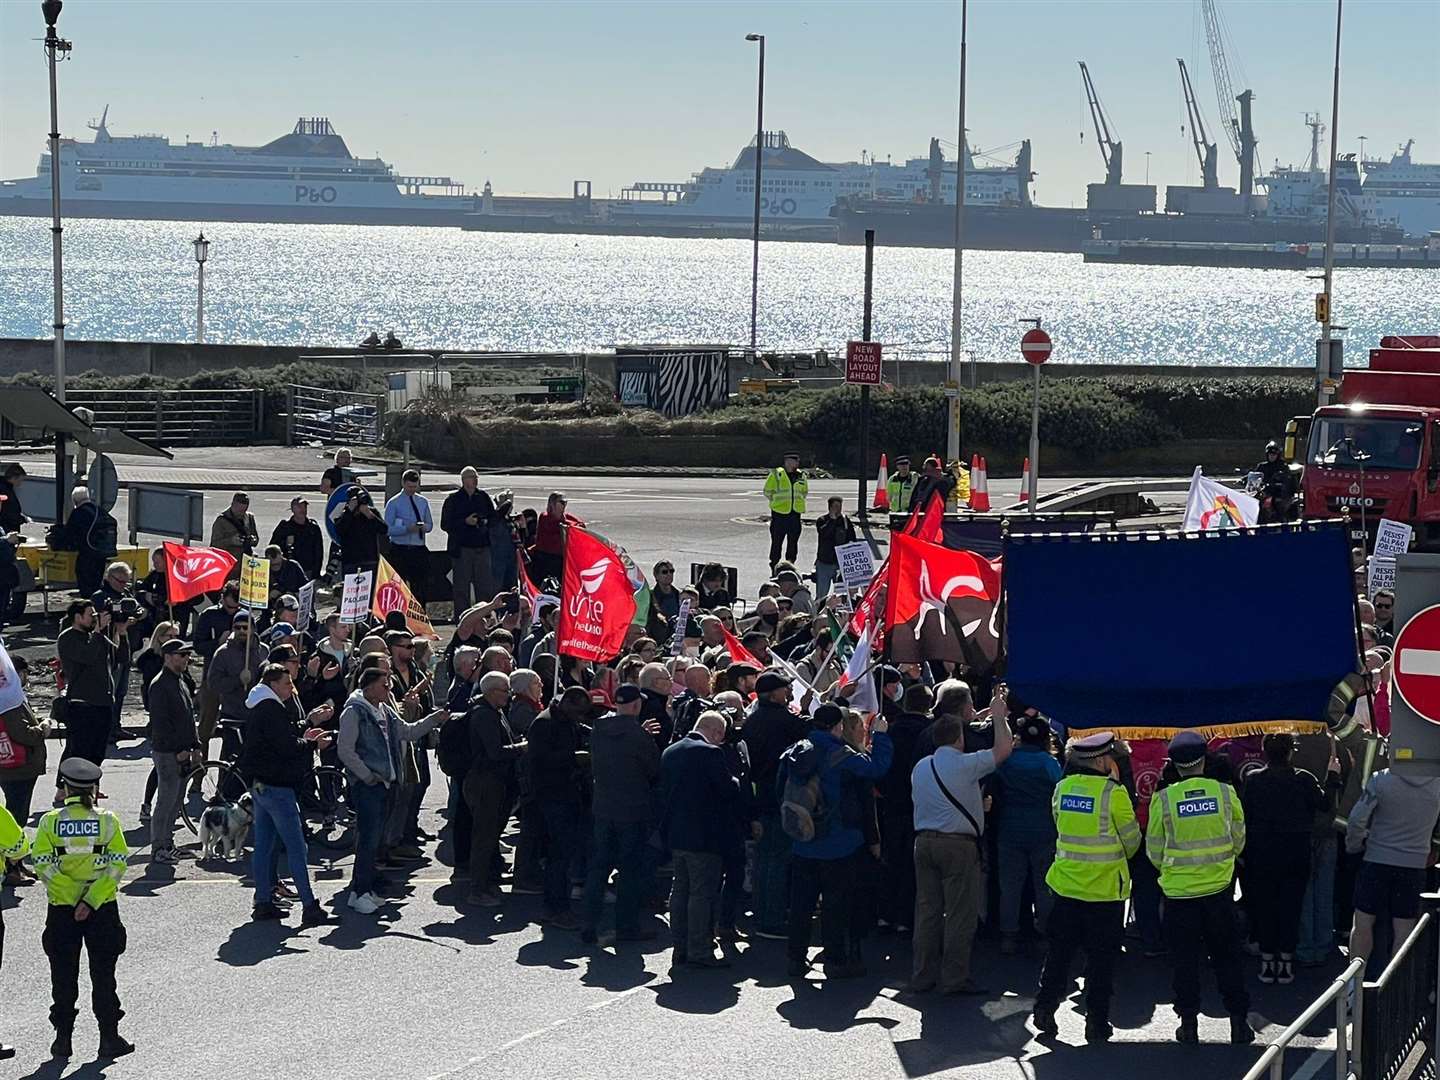 Protesters in Dover had signs and banners reading "save P&O jobs" after 800 people were made redundant last Thursday